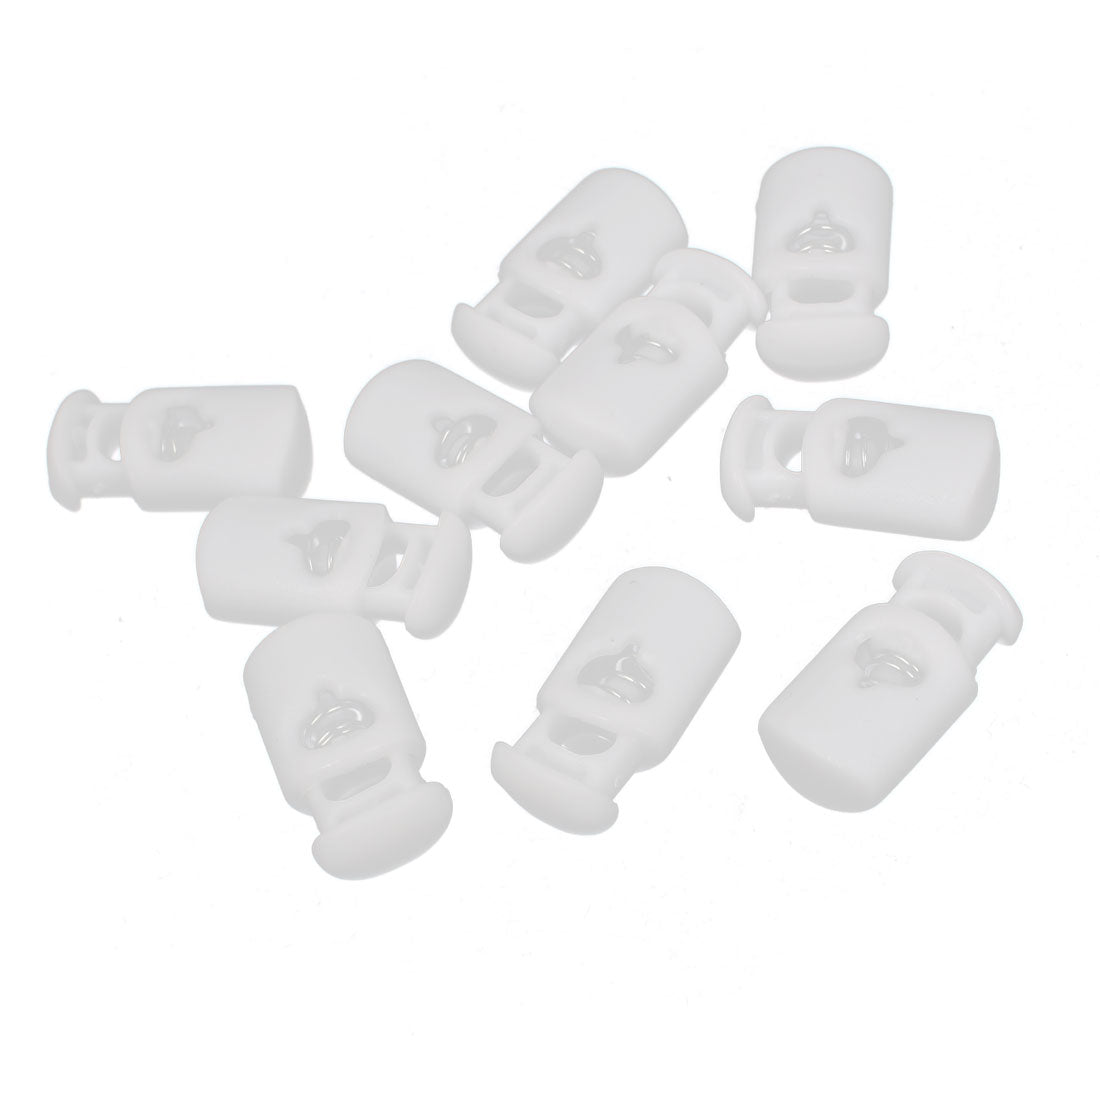 uxcell Uxcell White Plastic Single Hole 5mm Dia Cylindrical Shape Spring Loaded Clamps Clip Tent Drawstring Cord Locks Stopper Toggles Fastener 10pcs